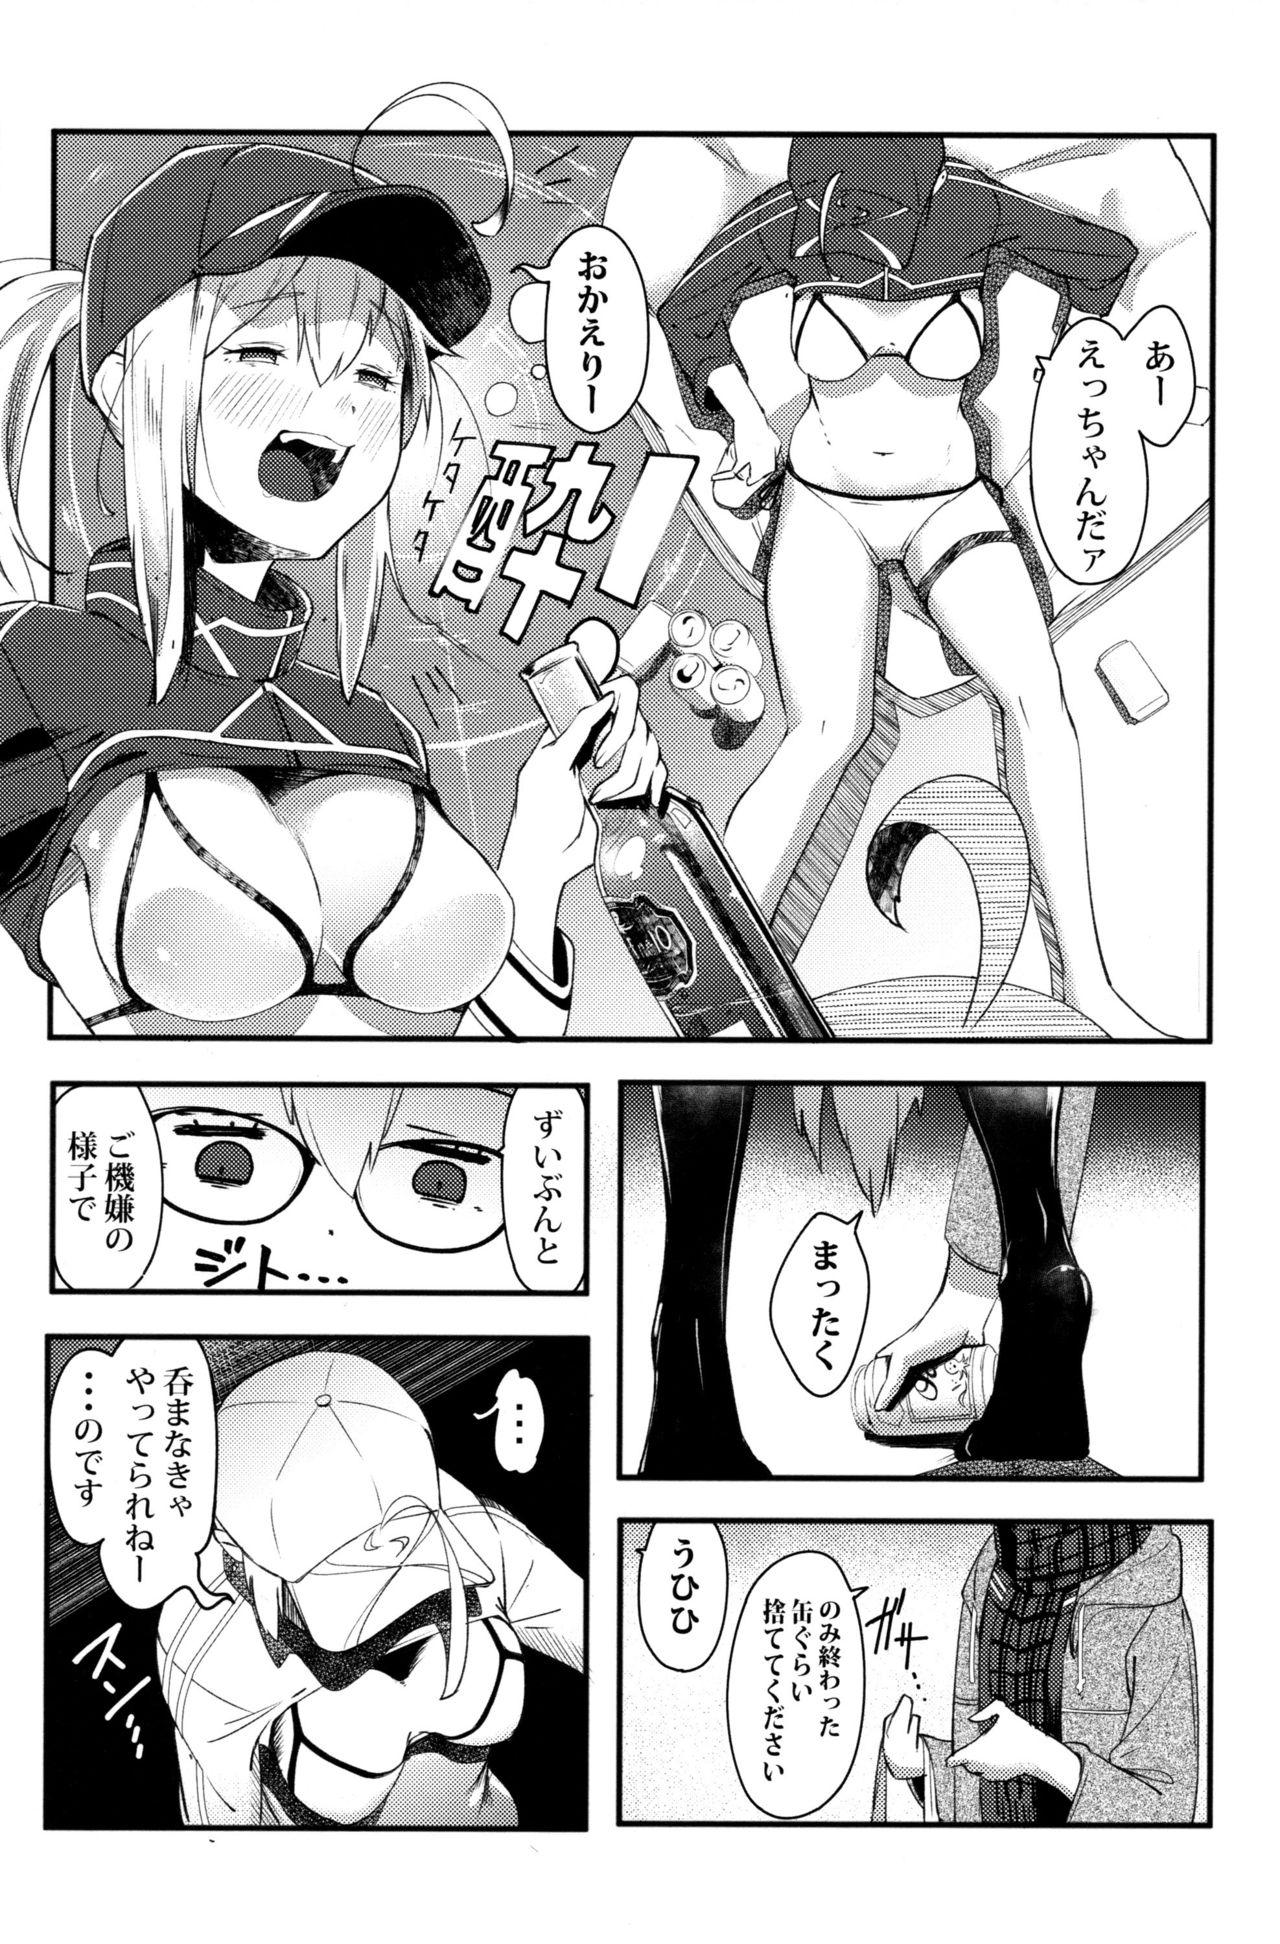 Oral Sex Porn kiss the future - Fate grand order Hogtied - Page 5